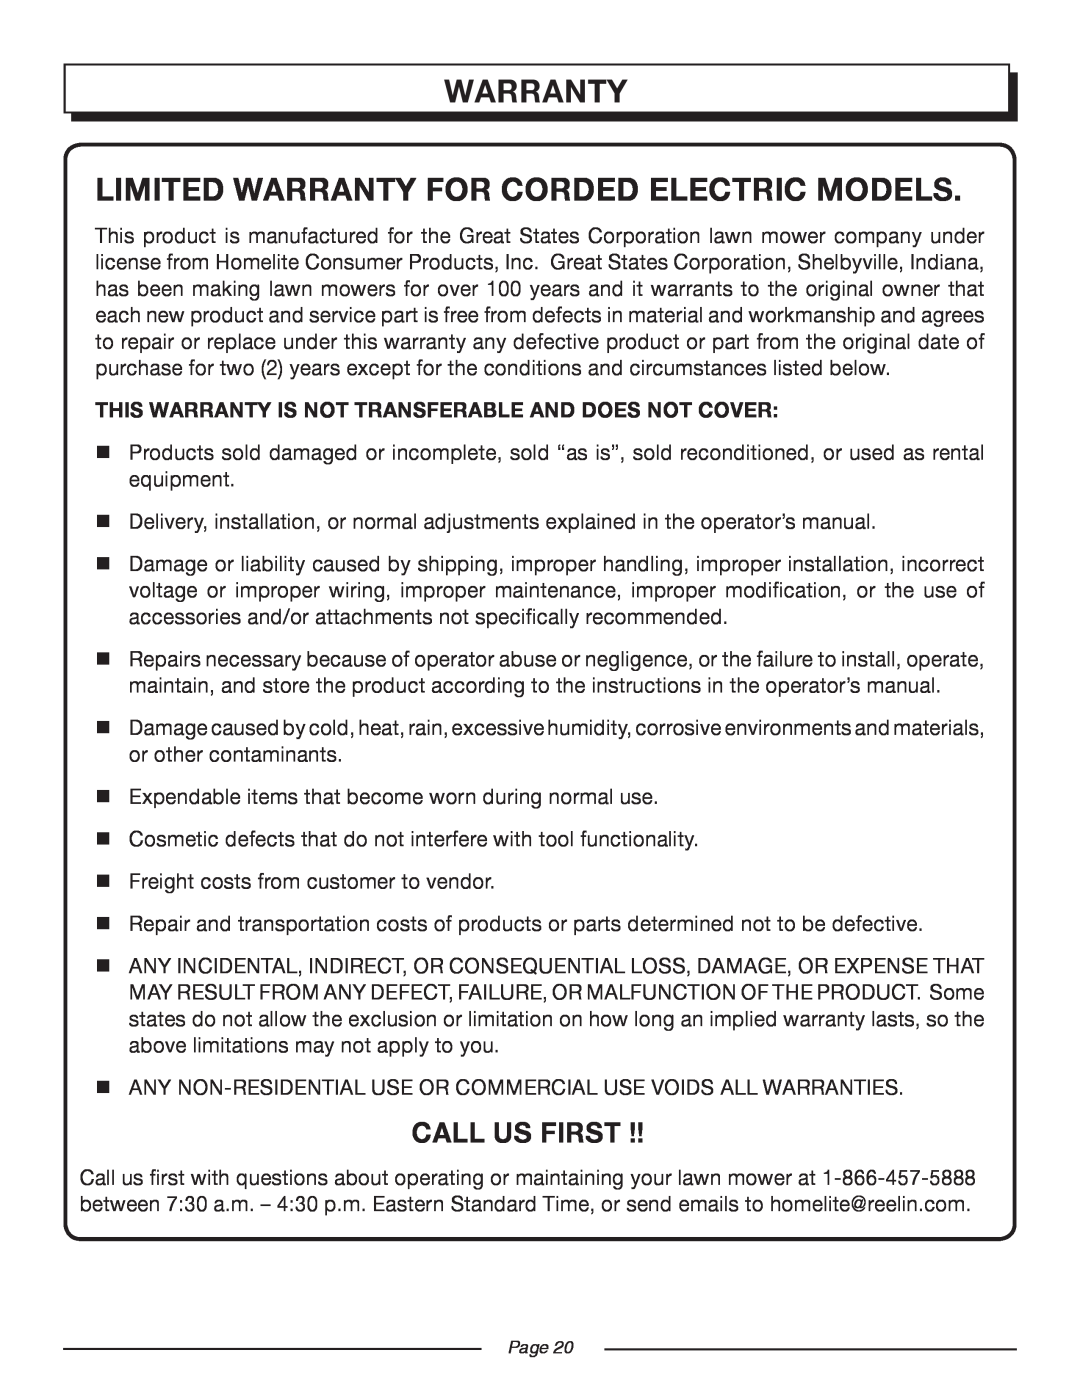 Homelite UT13118, UT13120 manual Warranty Limited Warranty For Corded Electric Models, Call Us First 